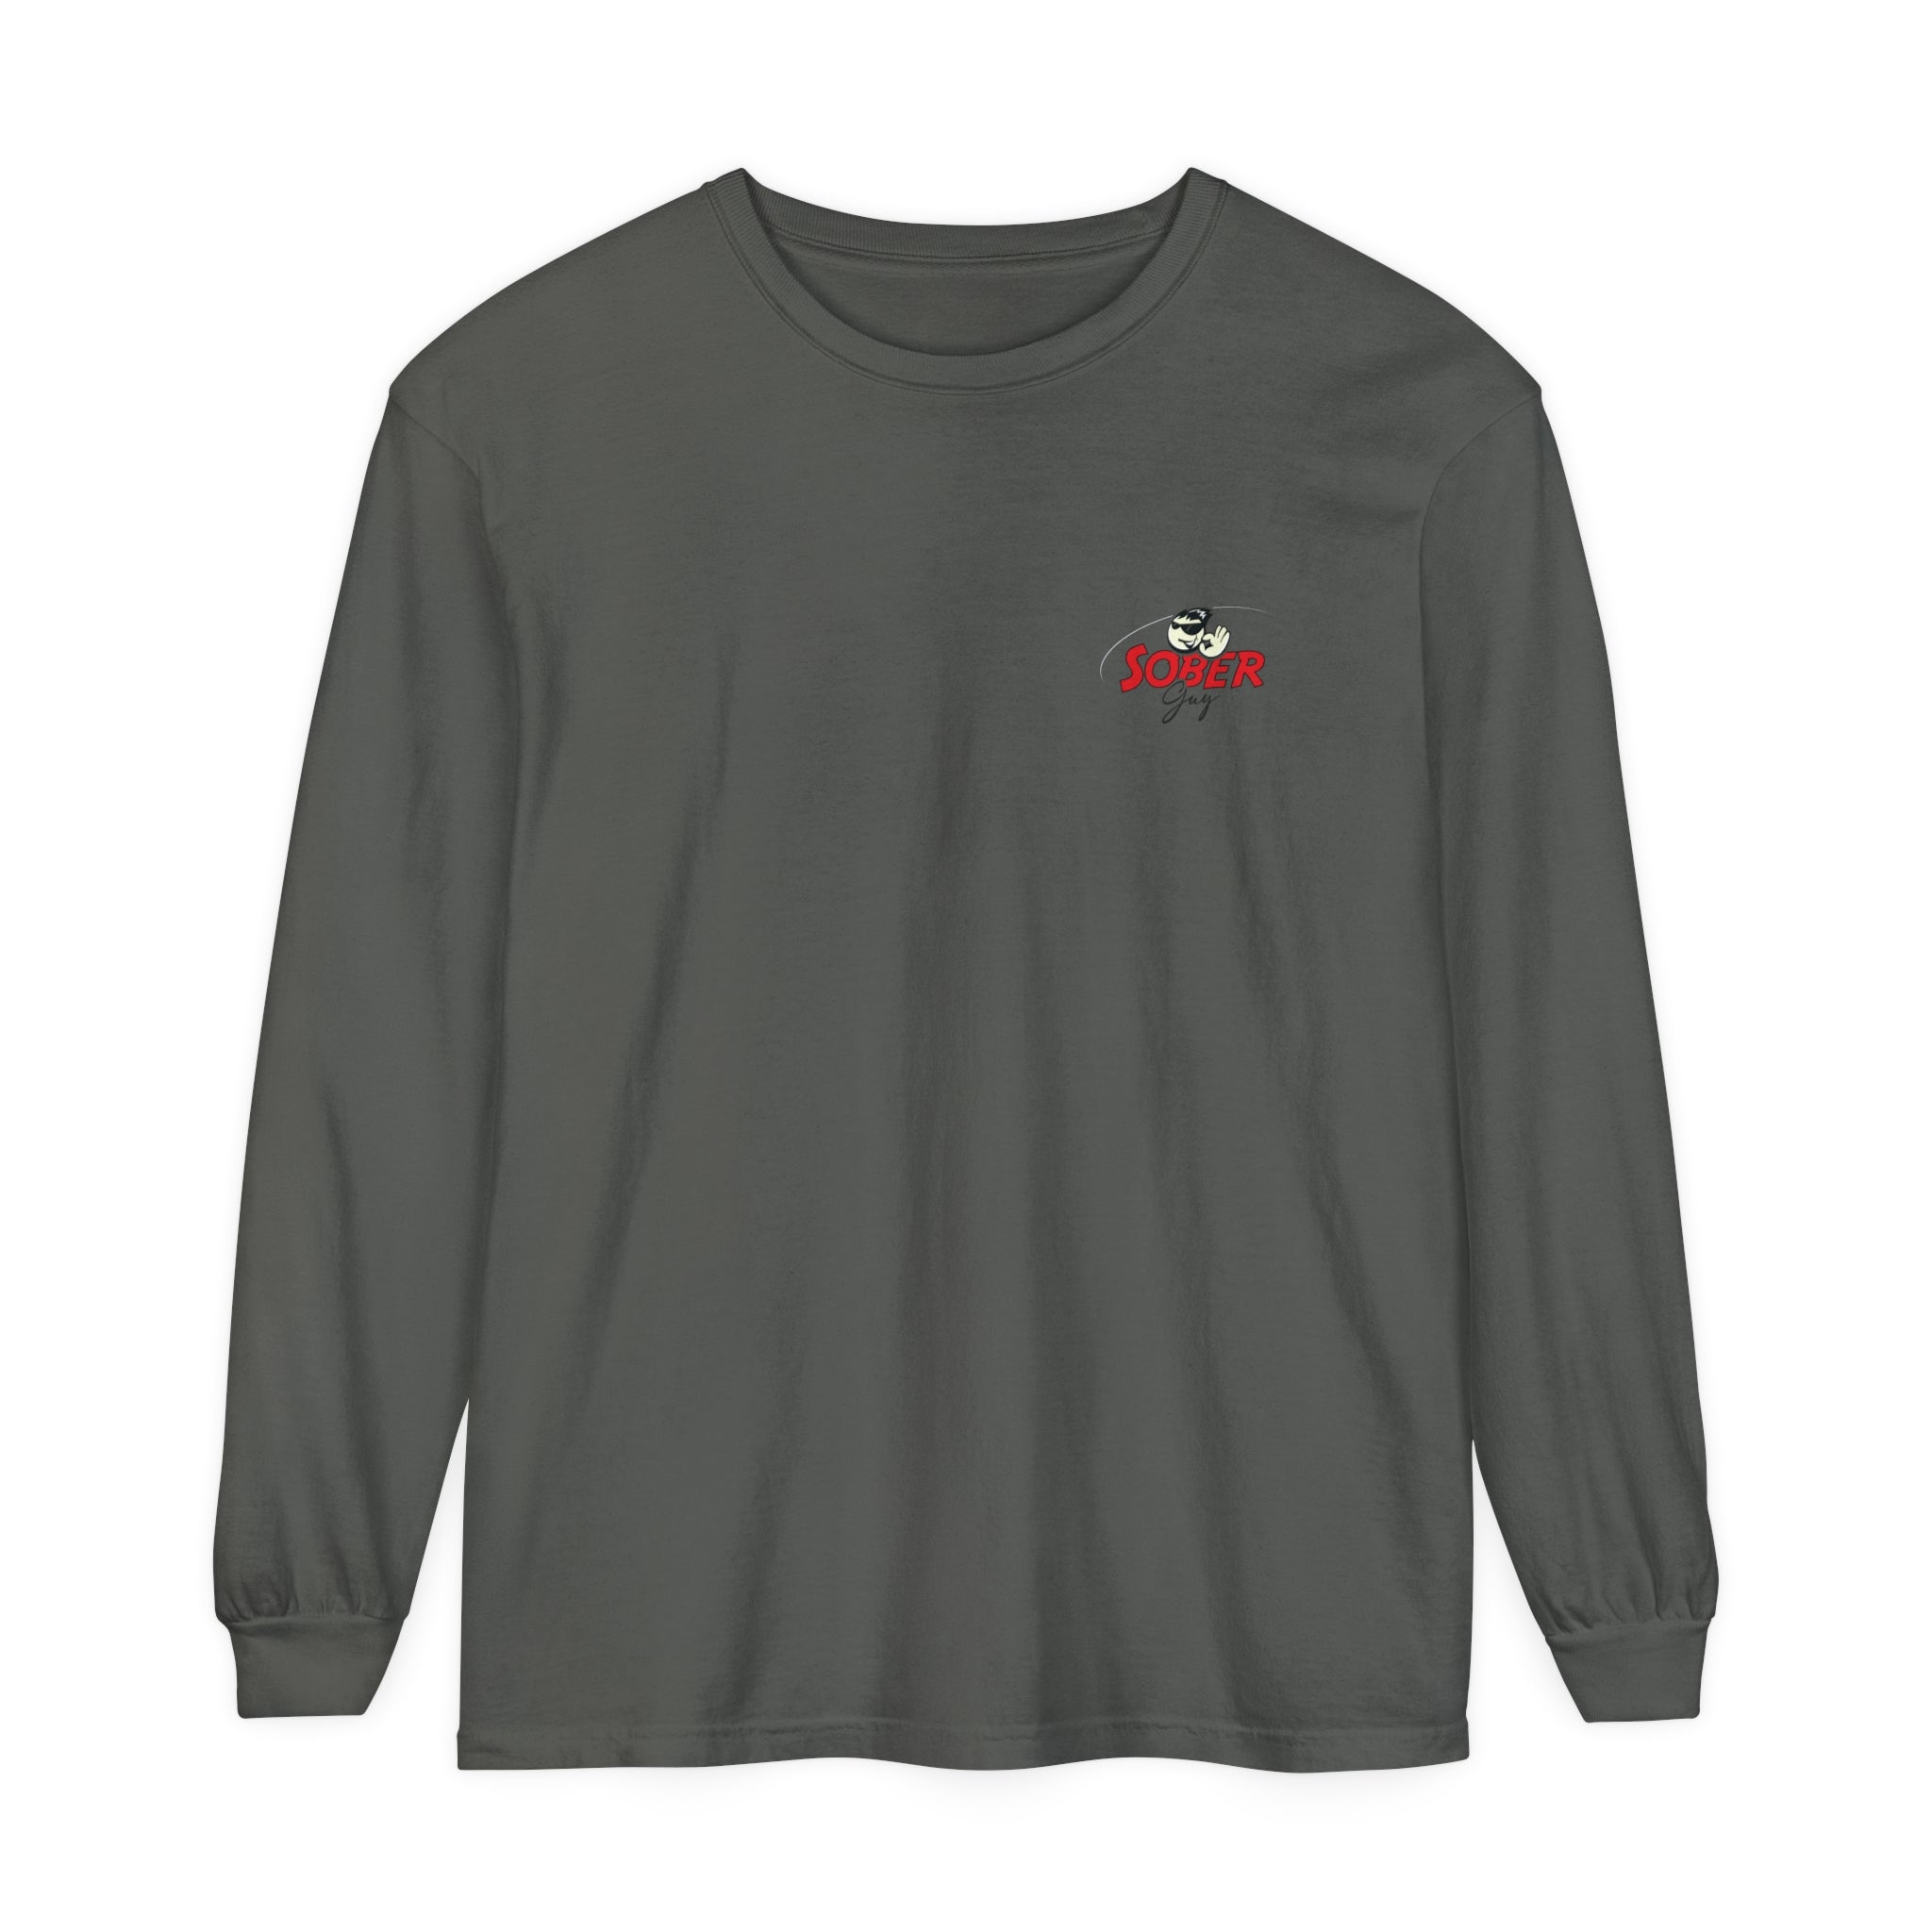 Sober Guy-Long Sleeve Tee-Powered by Sobriety